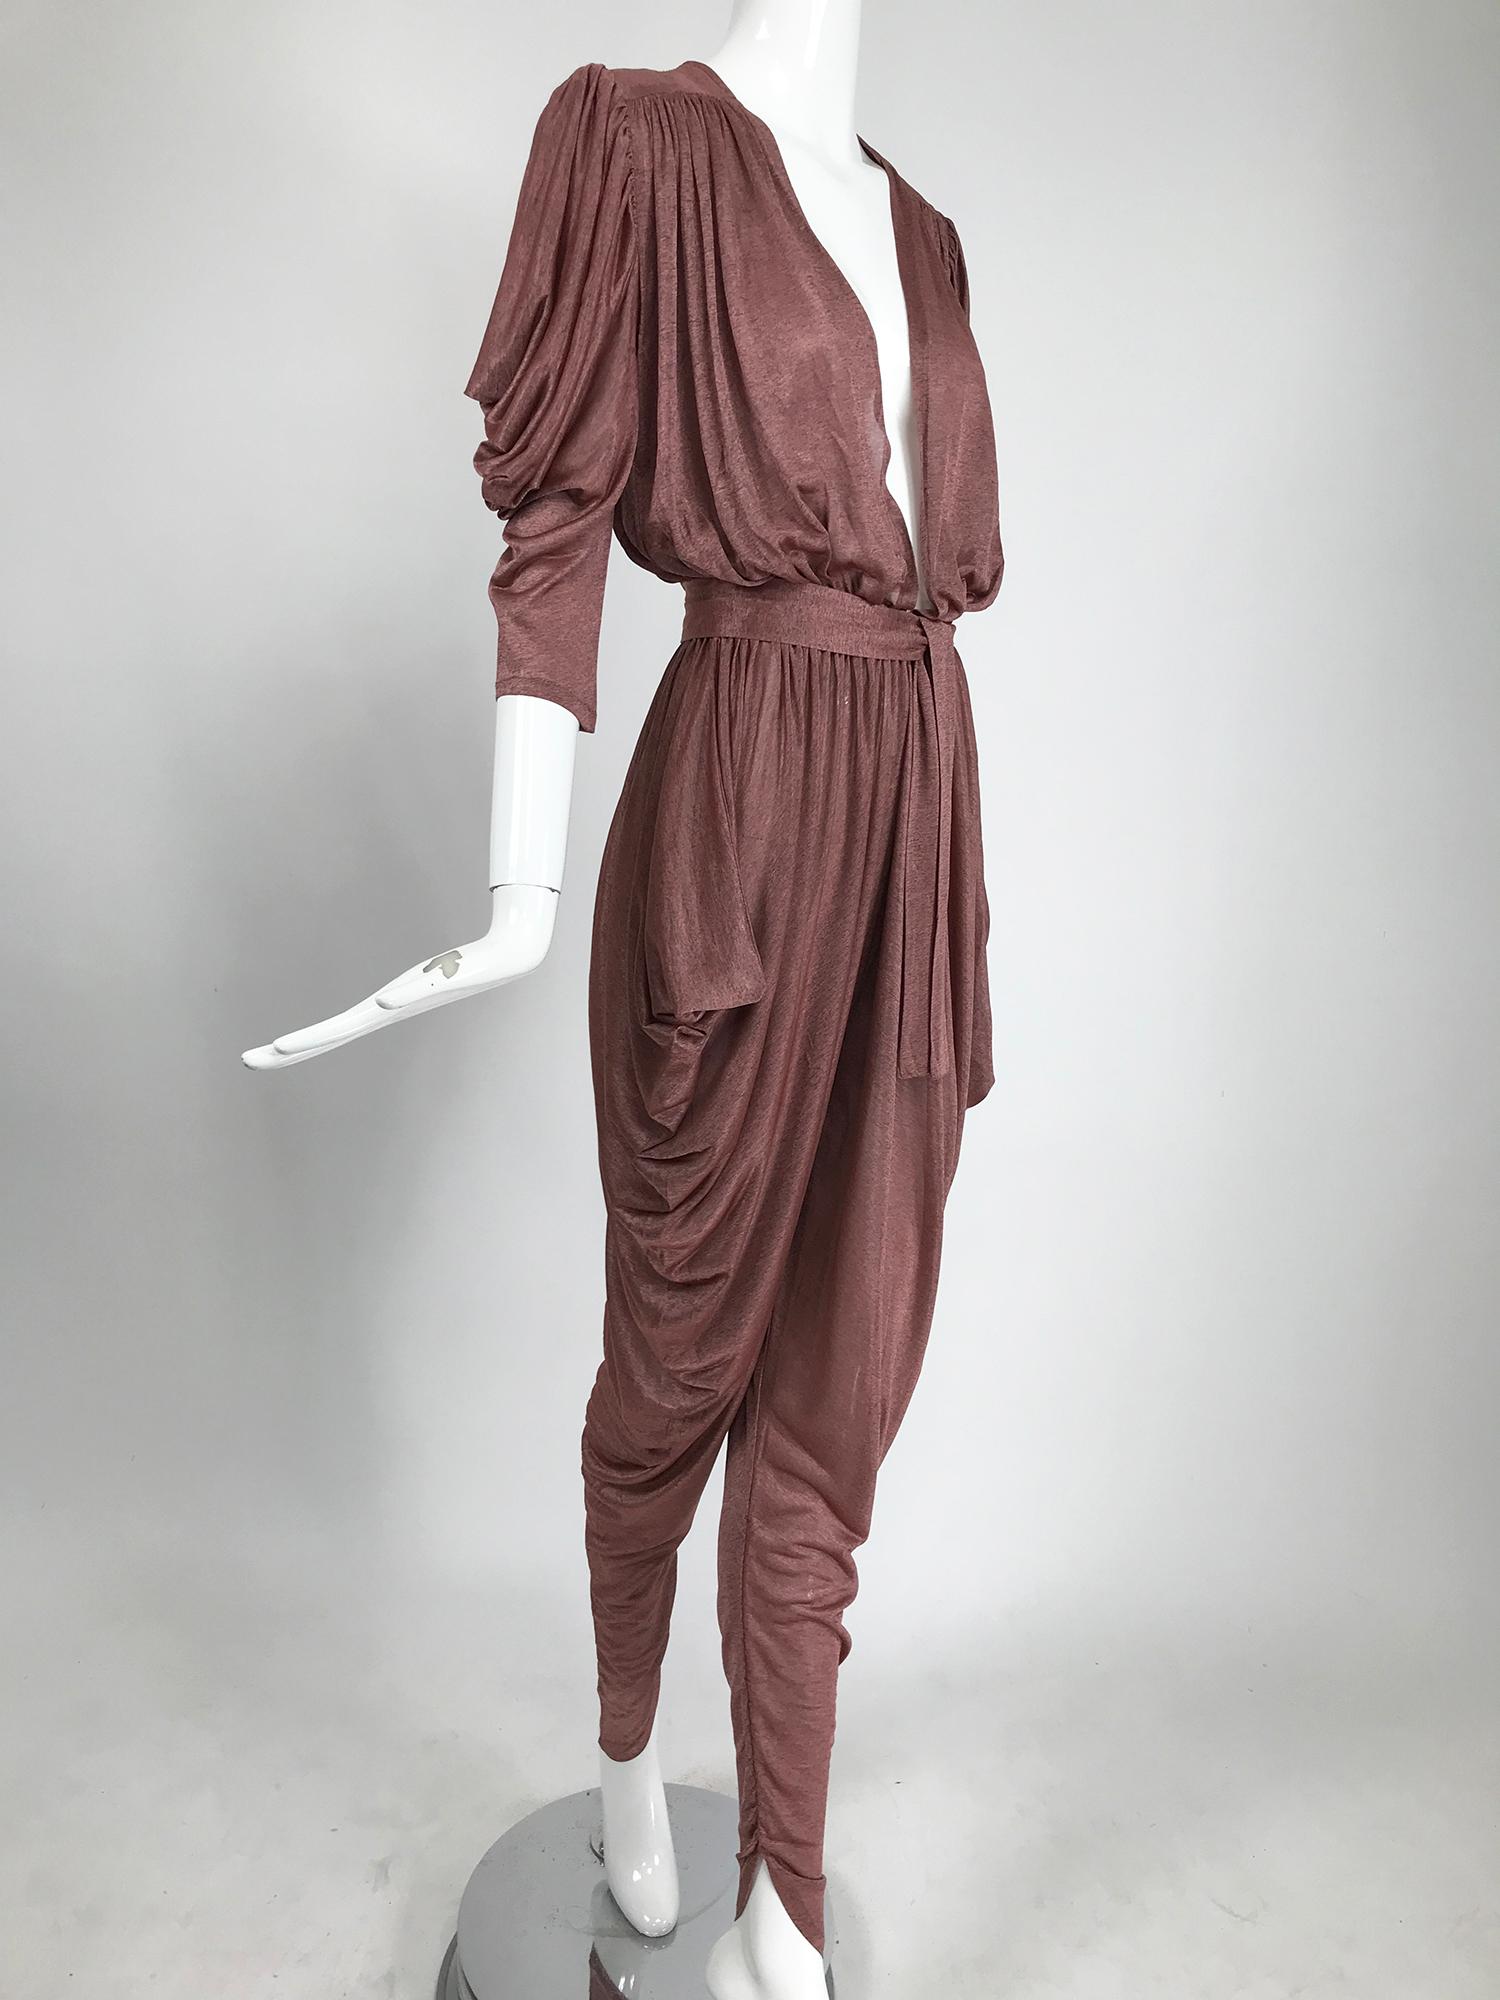 Vintage Yvonne Jacovou at Cornelius W1 London, plunge draped jumpsuit from the Bowie, Ziggy Stardust era 1970s. Silky sheer fabric in a cocoa rose fleck, this is the epitome of early disco finery. Deep plunge neckline jumpsuit has angled draped